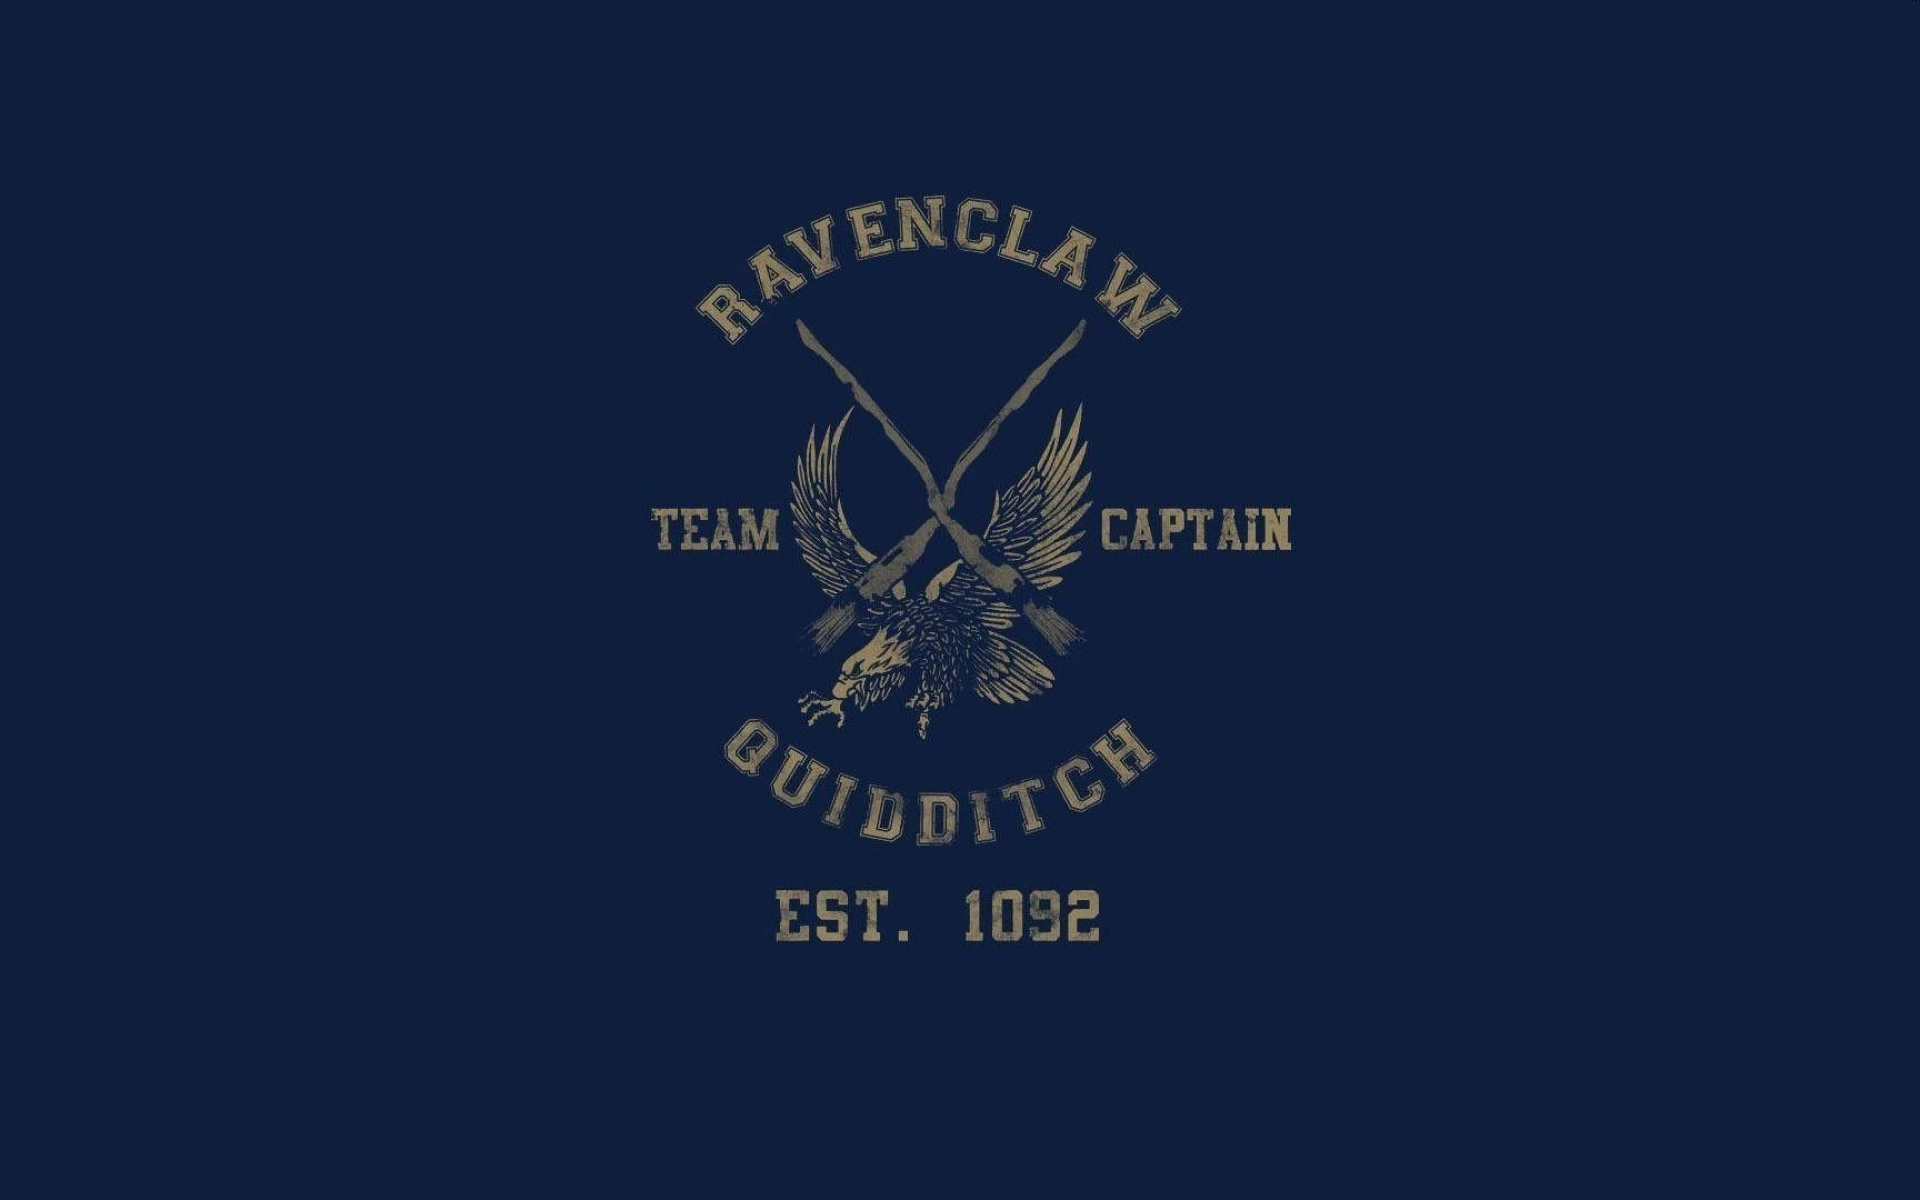 Ravenclaw Quidditch team, Harry Potter wallpaper, House pride, Slytherin rivalry, 1920x1200 HD Desktop